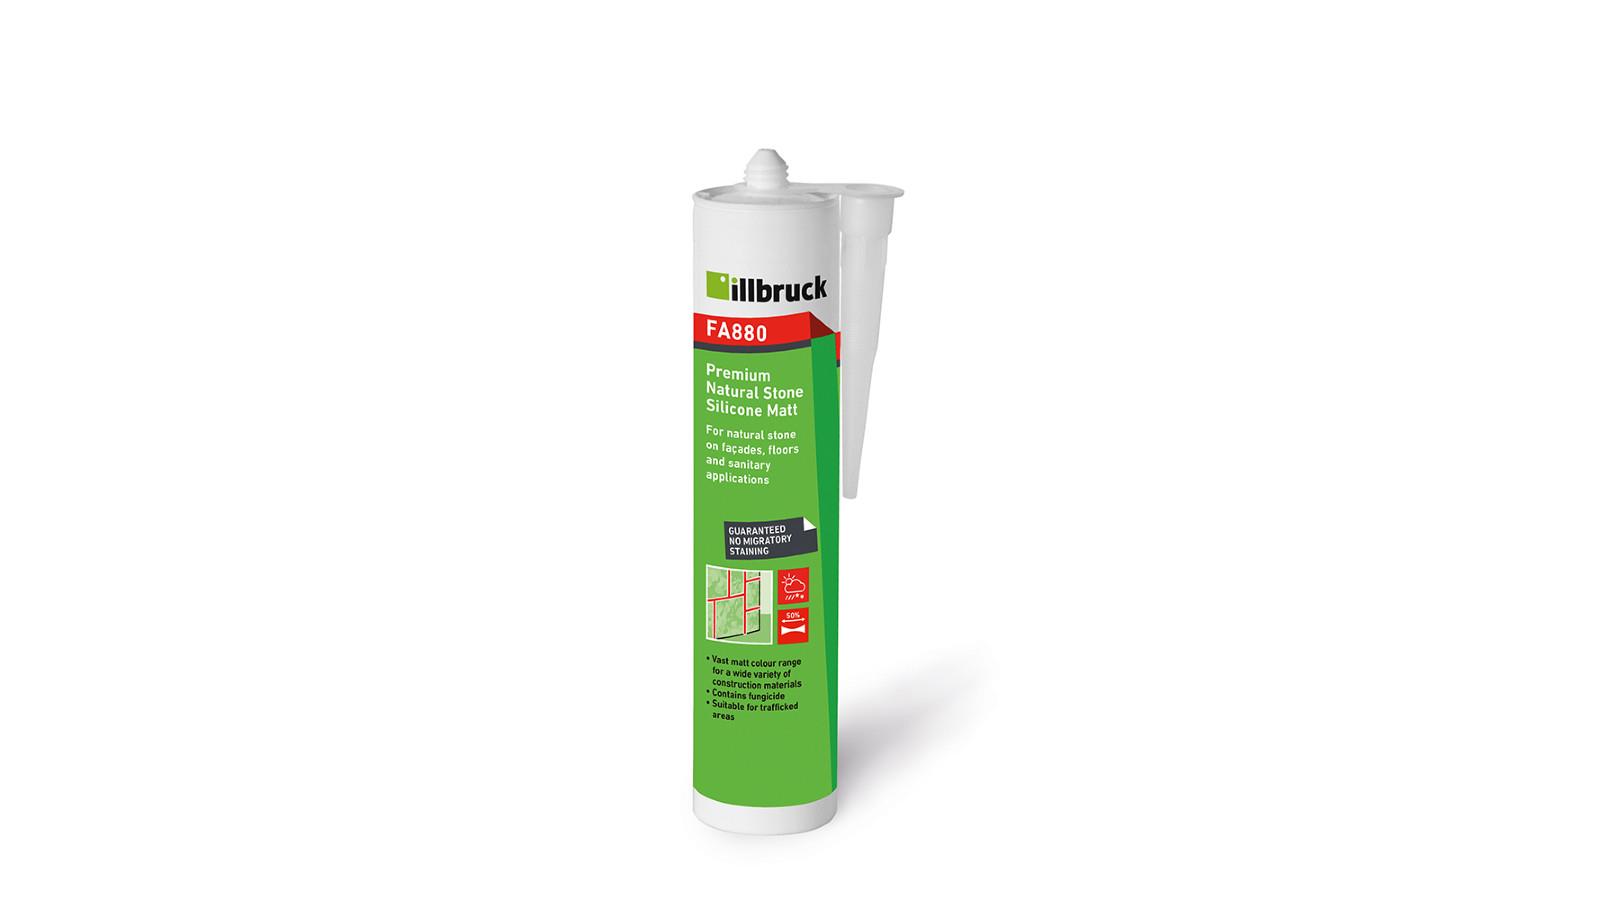 Stain-free sealing for natural stone flooring with illbruck FA880 image